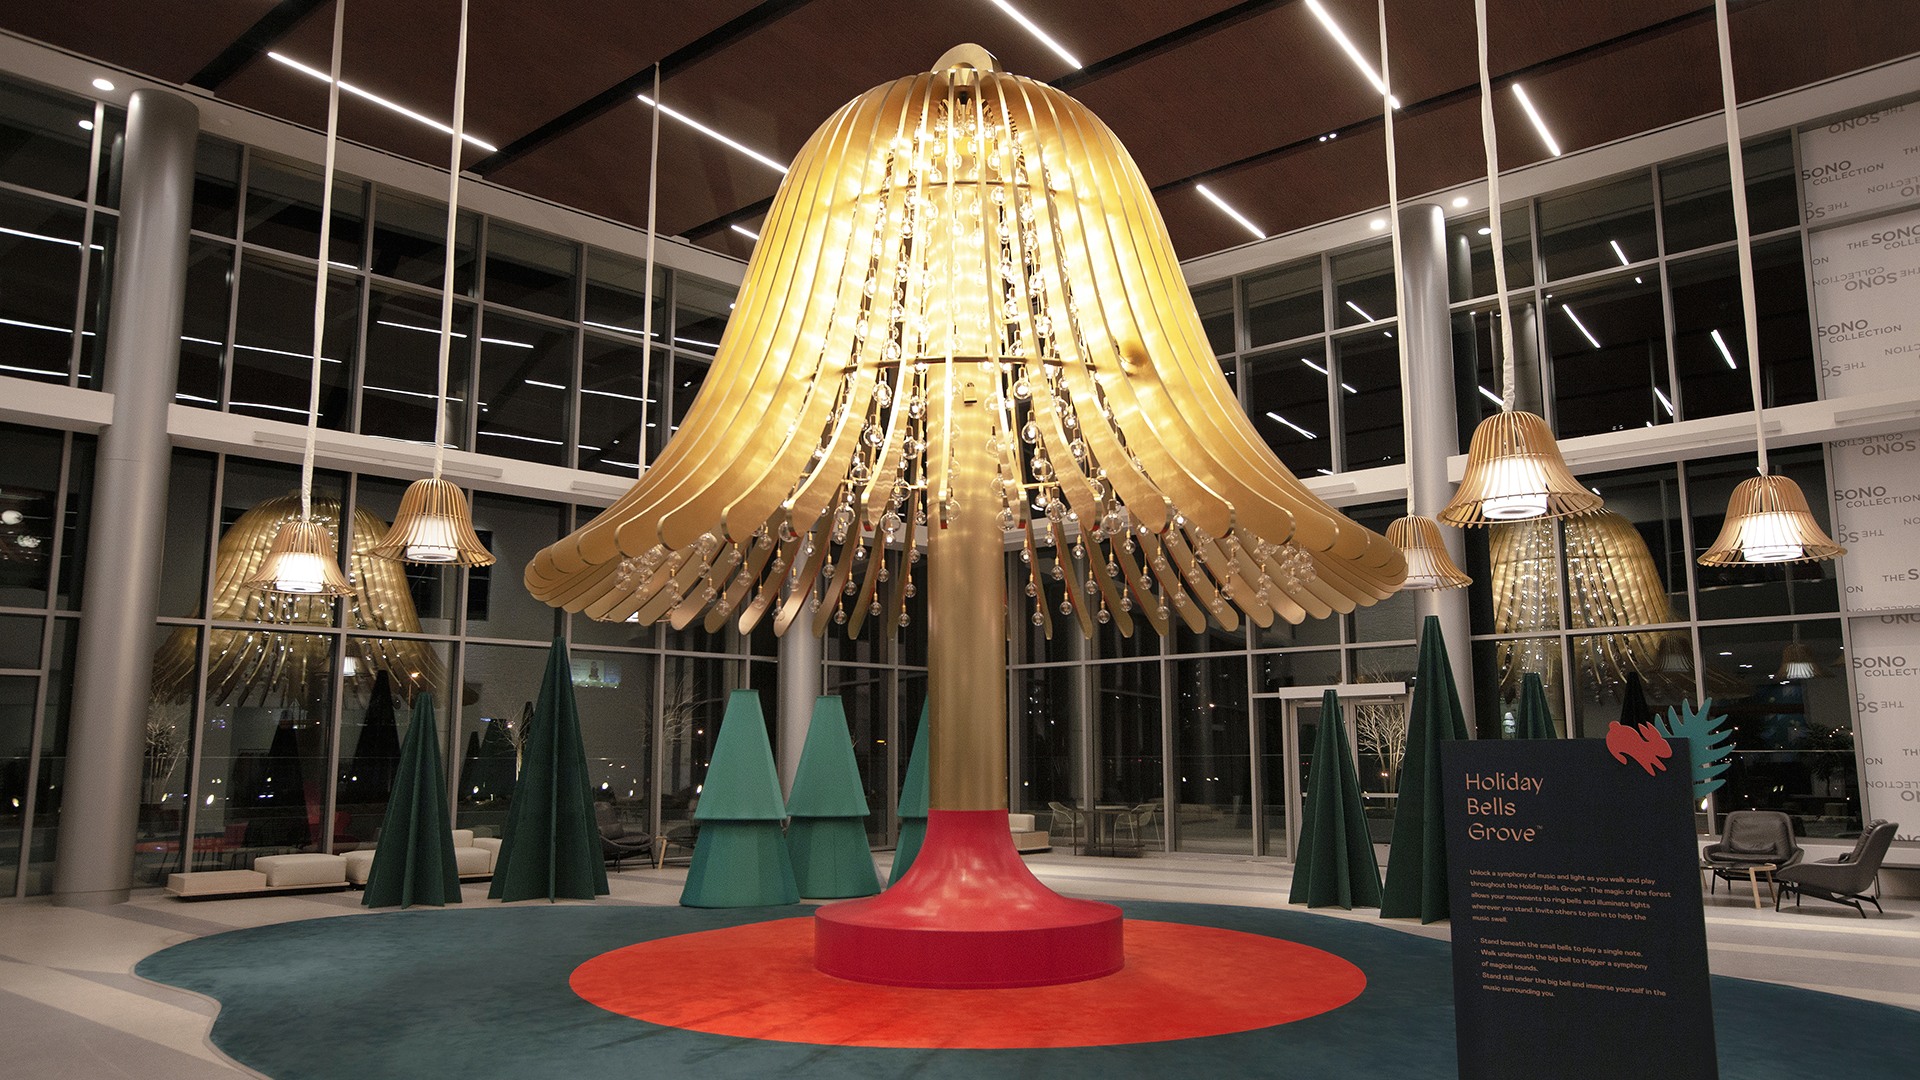 Wide shot of the Holiday Bell Grove located in the Magnificent Room at the SoNo Mall in Norwalk Connecticut. One large central bell with reactive light bulbs dangling from each arm. Six gold mini bells hang around the central bell.